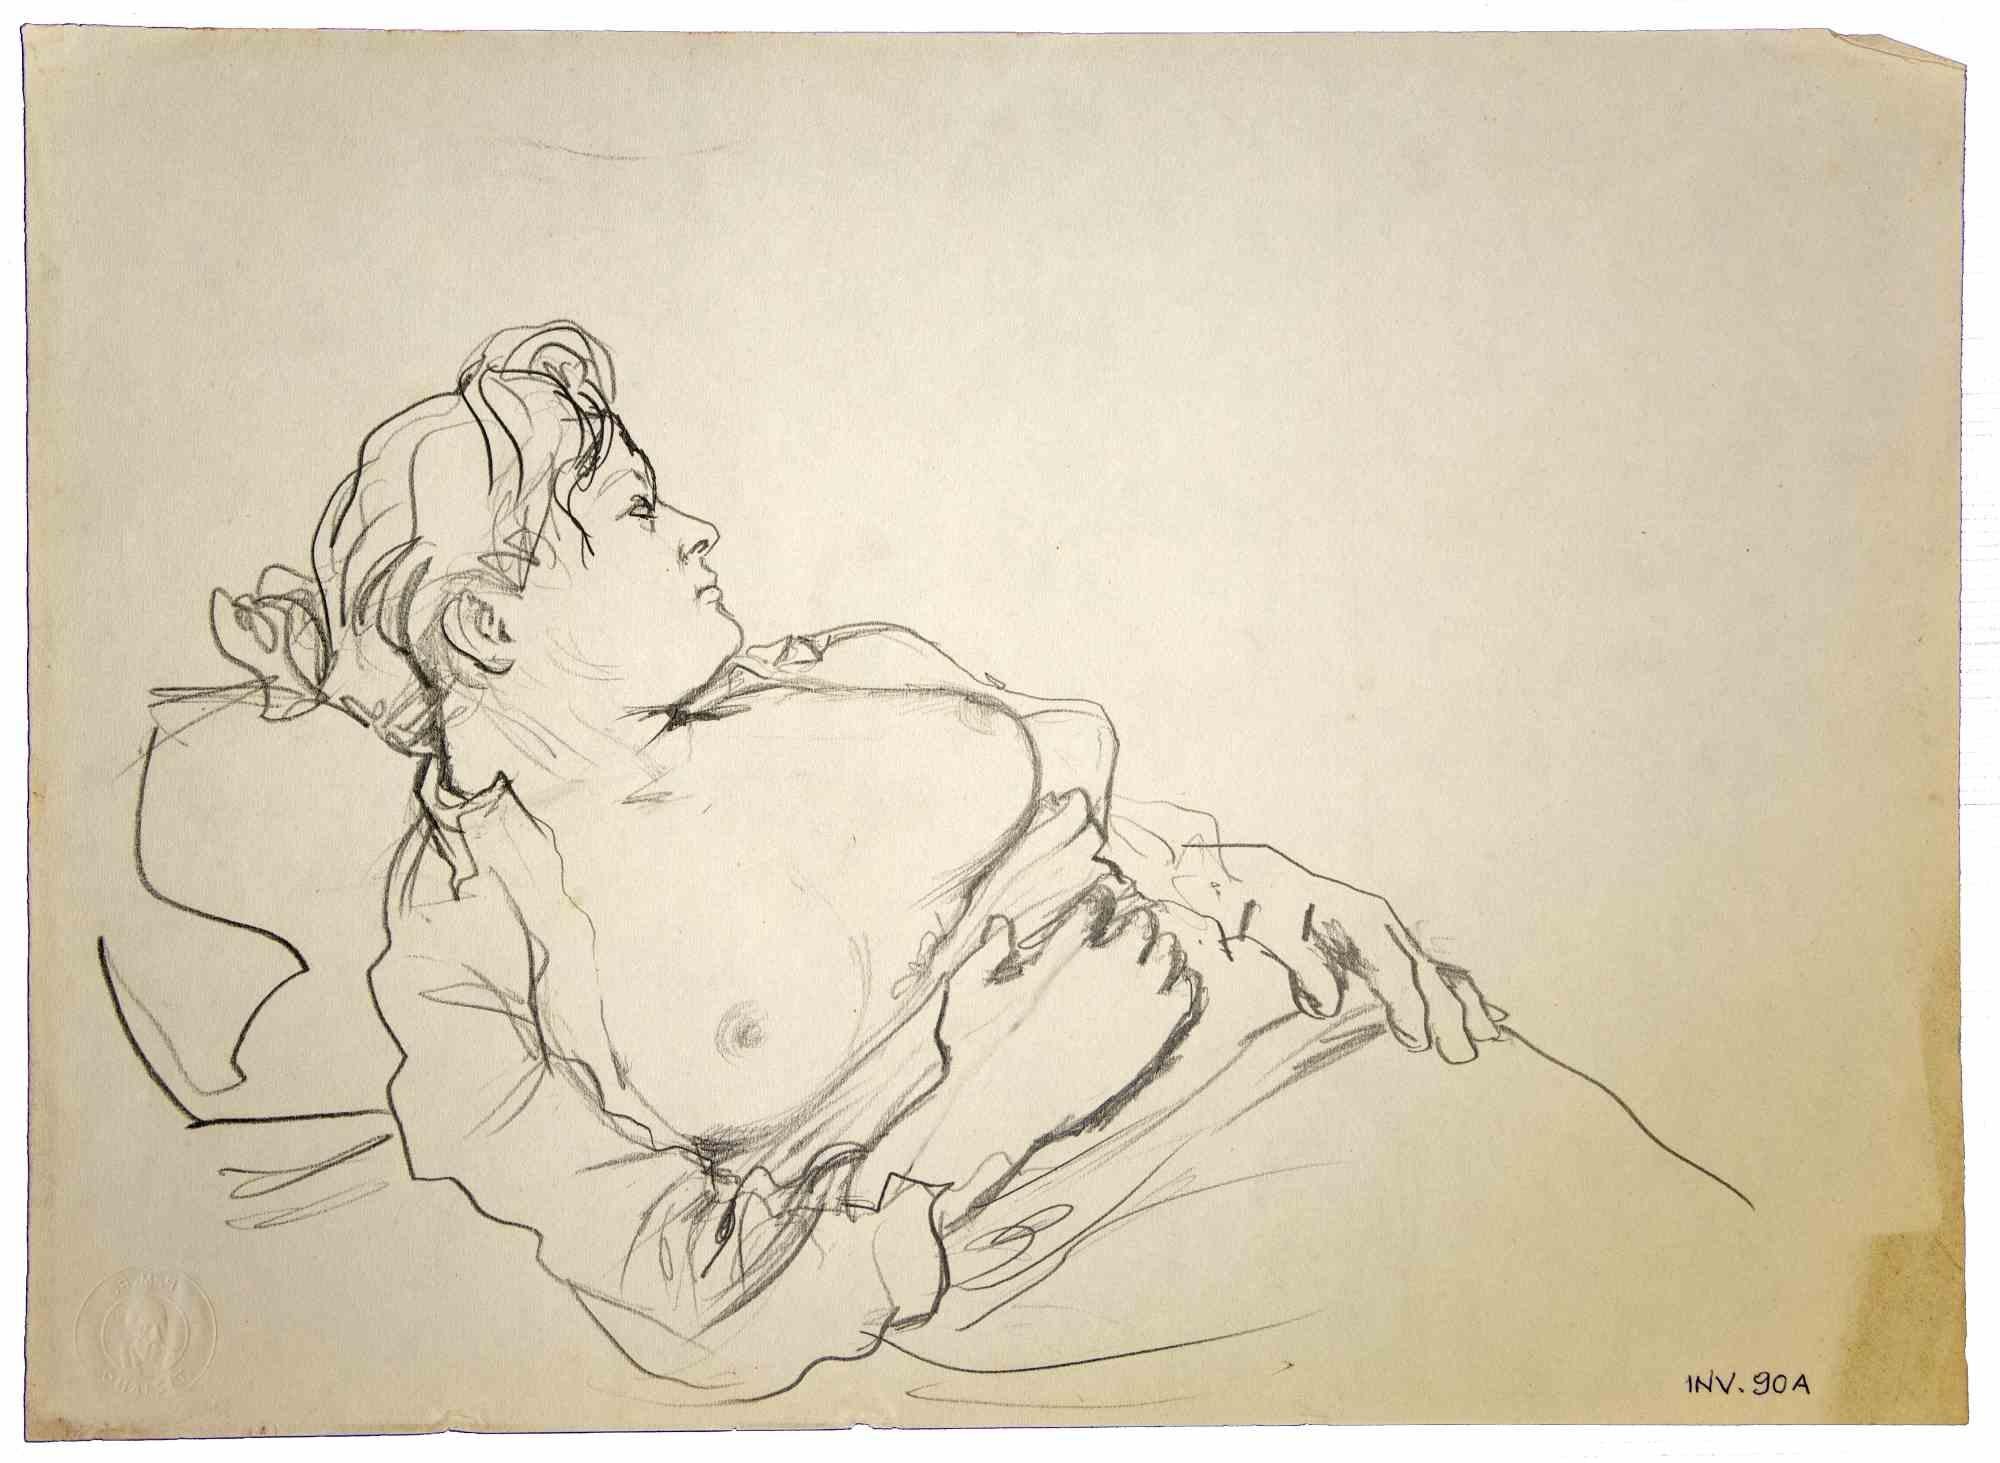 Reclined Figure is an original artwork realized in the 1970s by the Italian Contemporary artist  Leo Guida  (1992 - 2017).

Original drawings in pencil on paper.

Good conditions but aged.

The artwork is depicted through strong strokes in